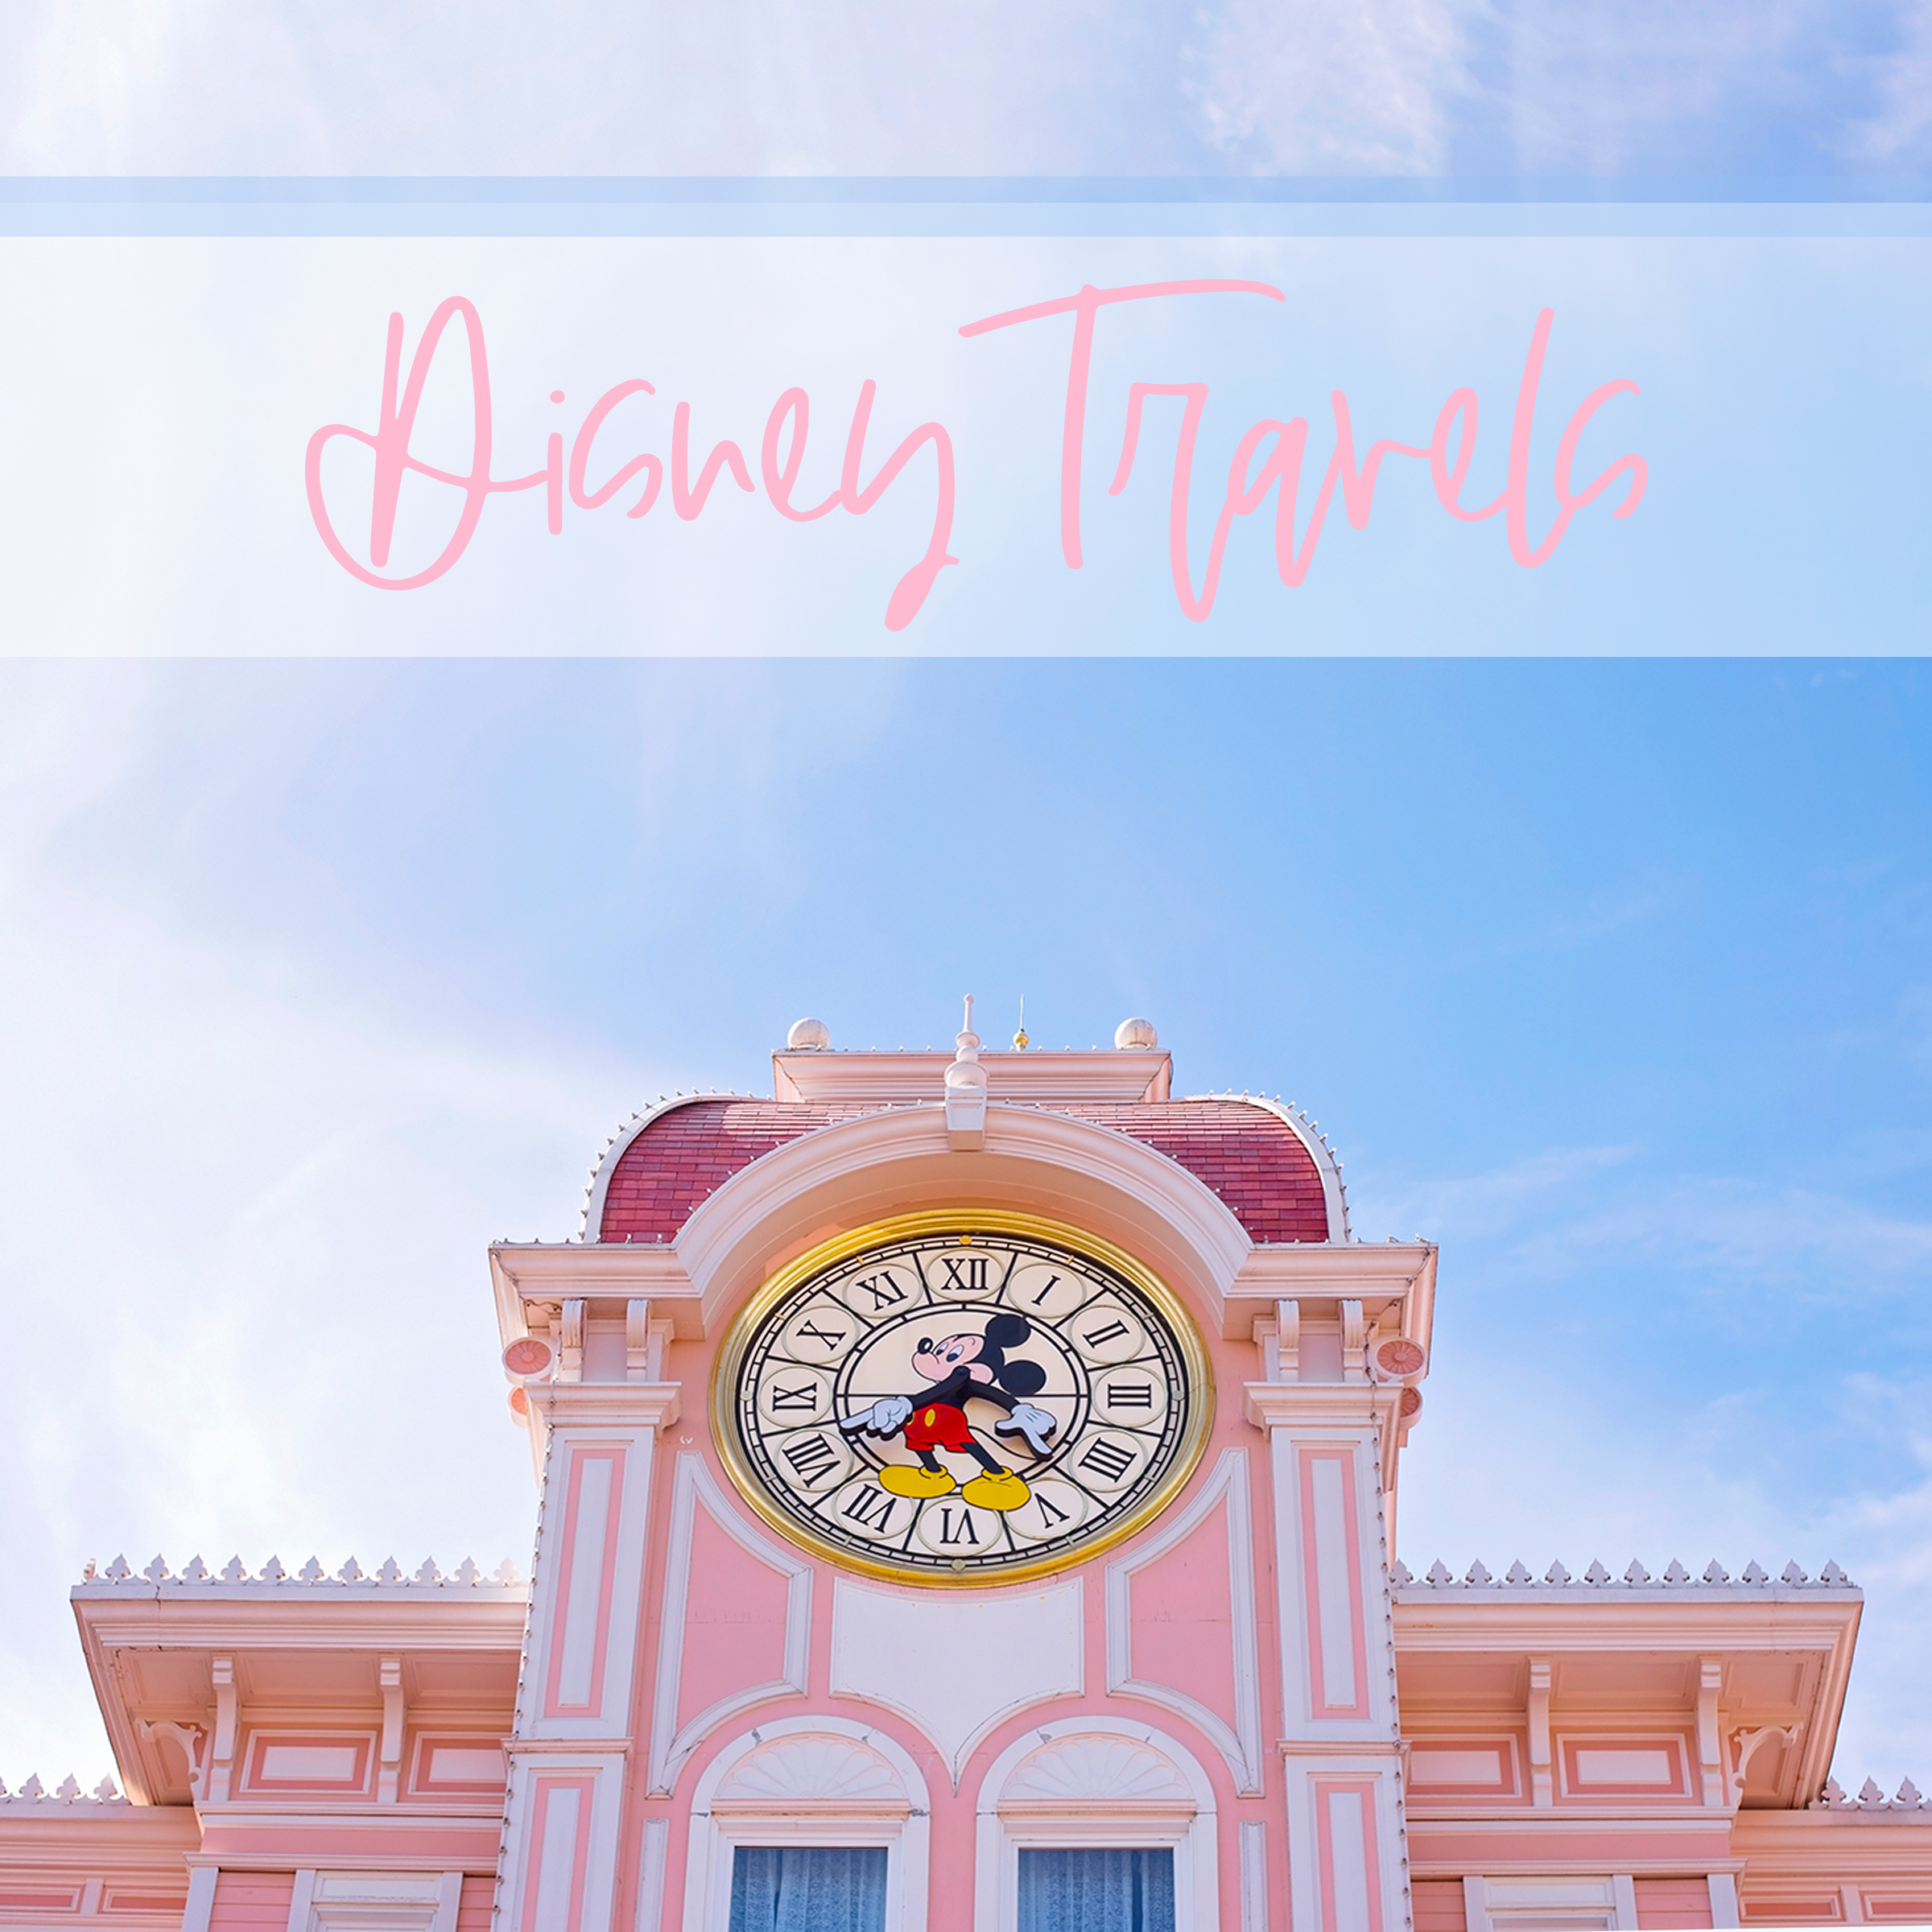 Sun Protection Must-Haves for Your Family Disney Holiday